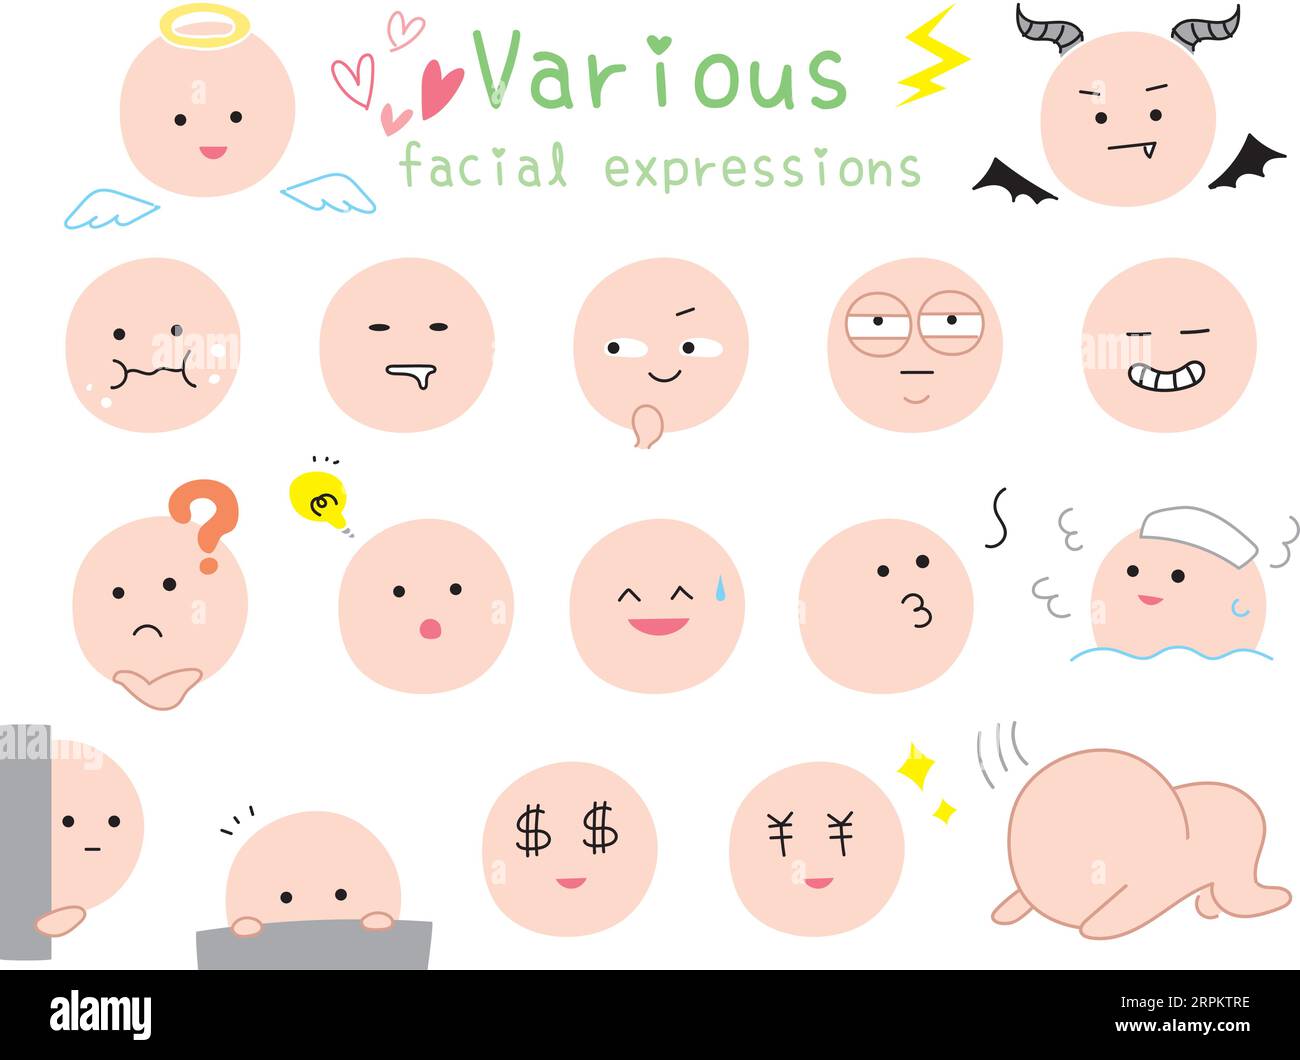 Simple and cute icons with various facial expressions. Colored flat design illustration.  Collection of funny emojis. Stock Vector